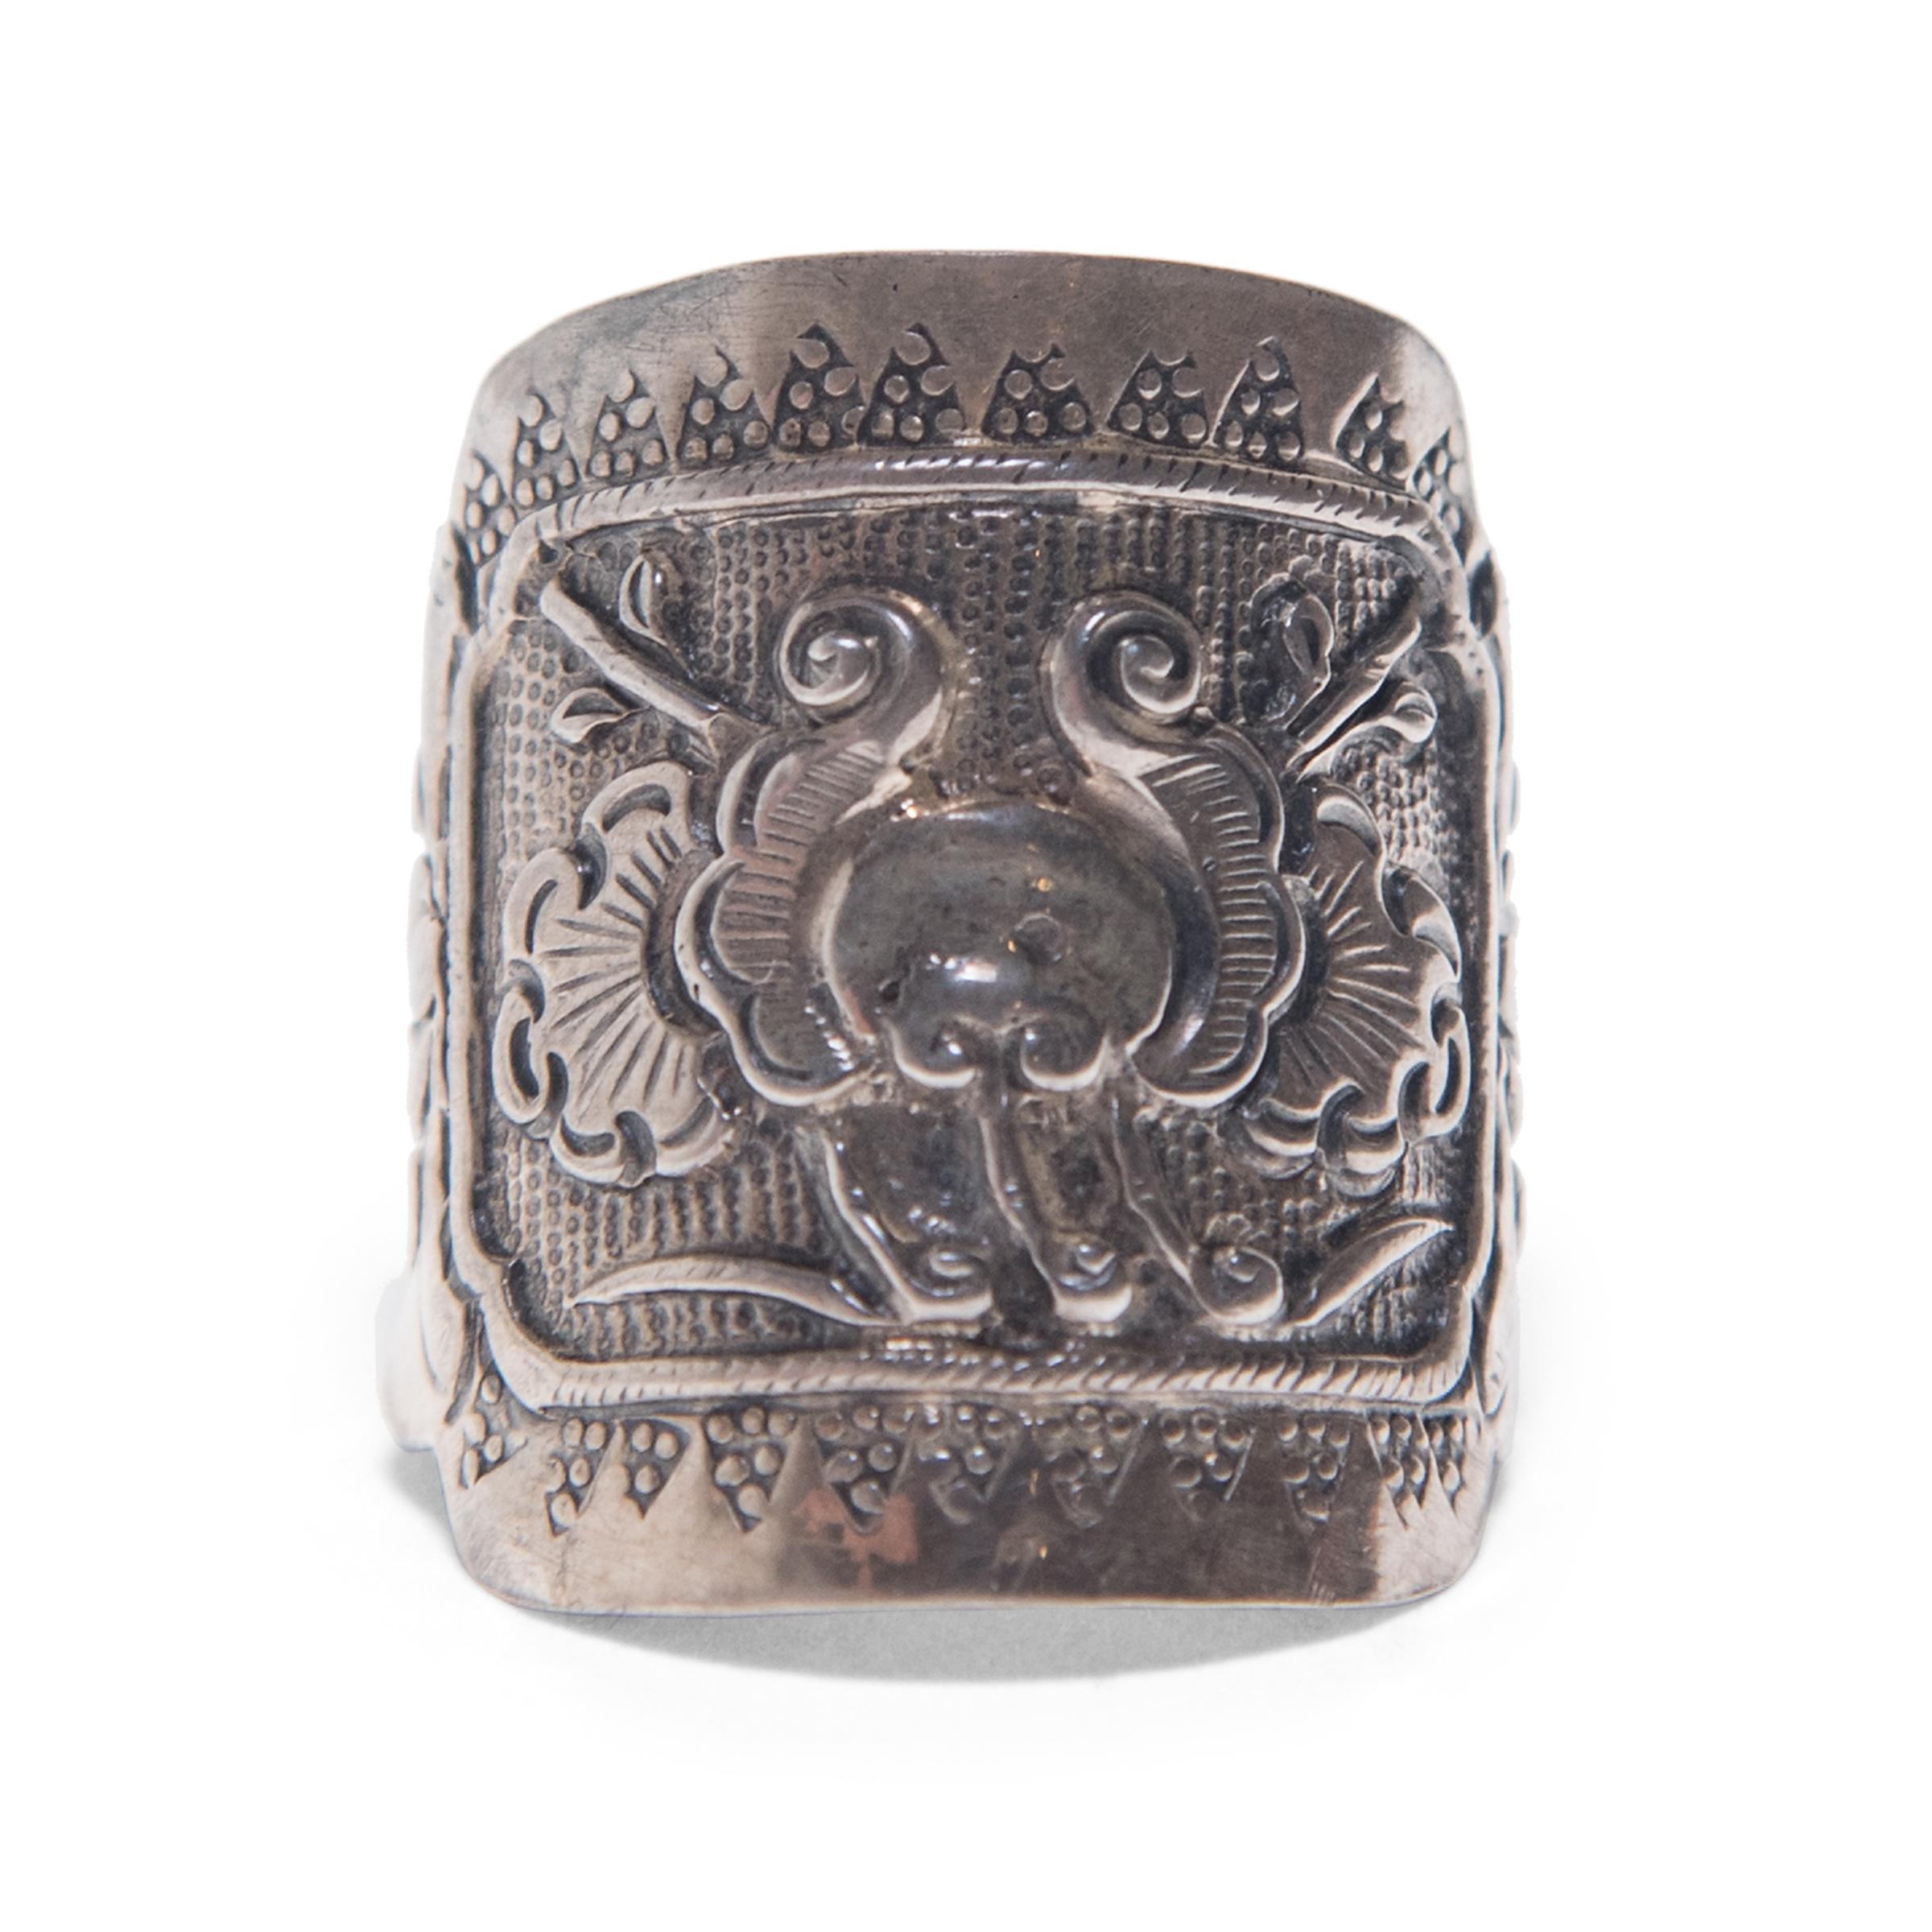 Dated to the late 19th century, this silver charm ring was believed to protect the wearer from bad luck and malevolent spirits. The ring is intricately decorated with geometric patterns and a floral design in low relief.

Ring size is adjustable.